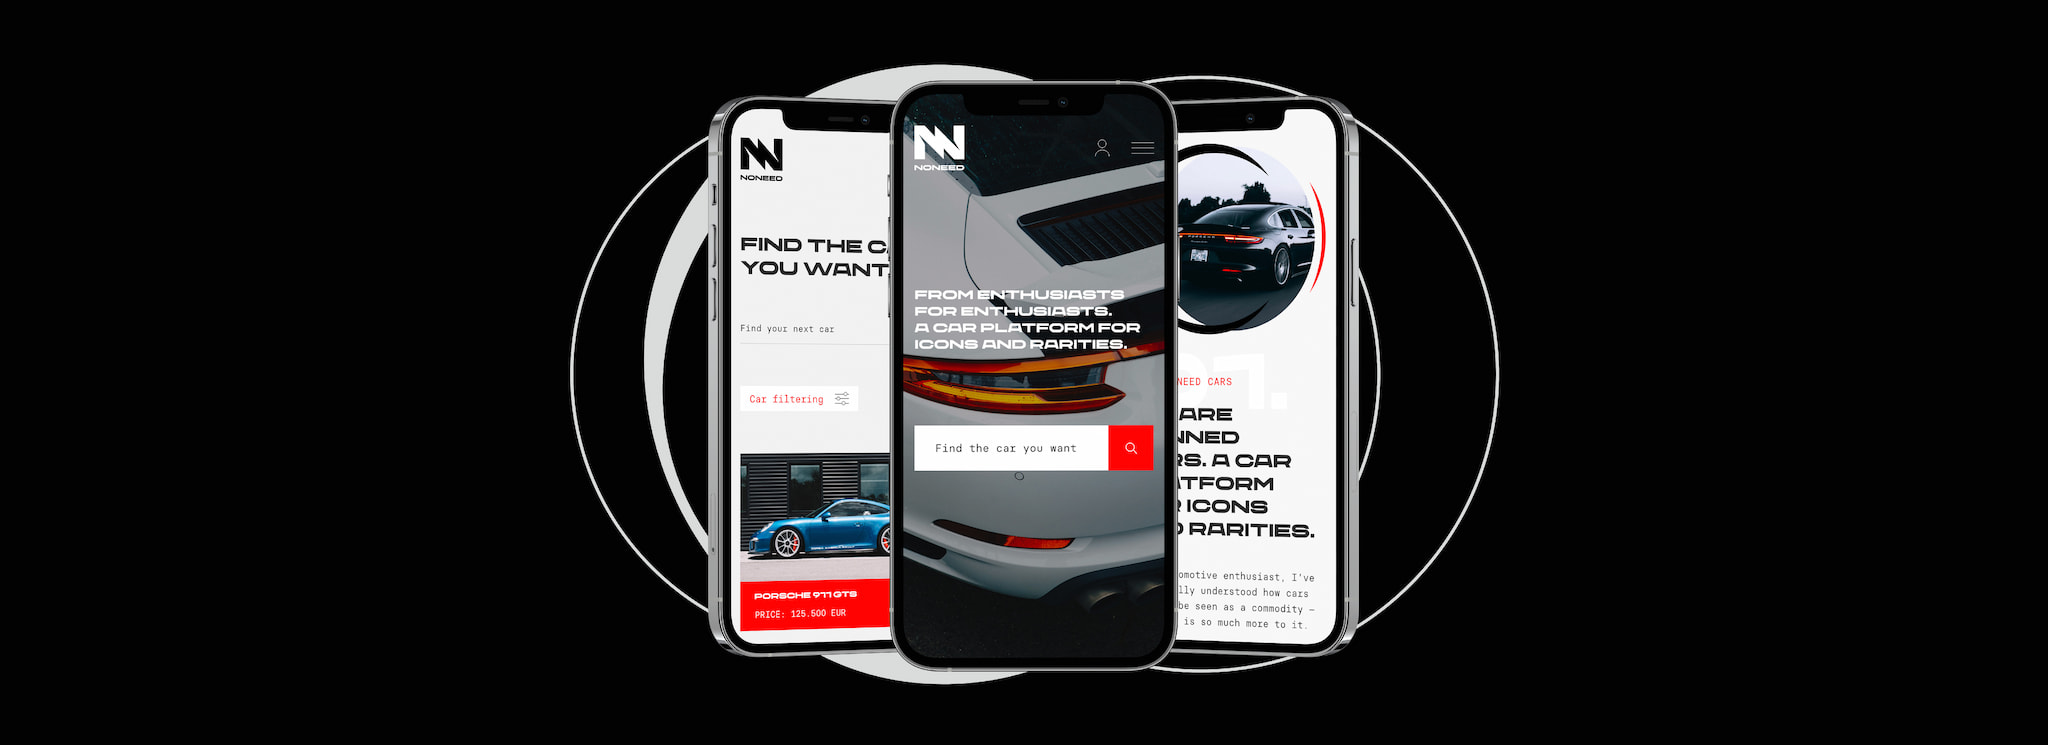 NONEED Cars - Platform for car enthusiasts